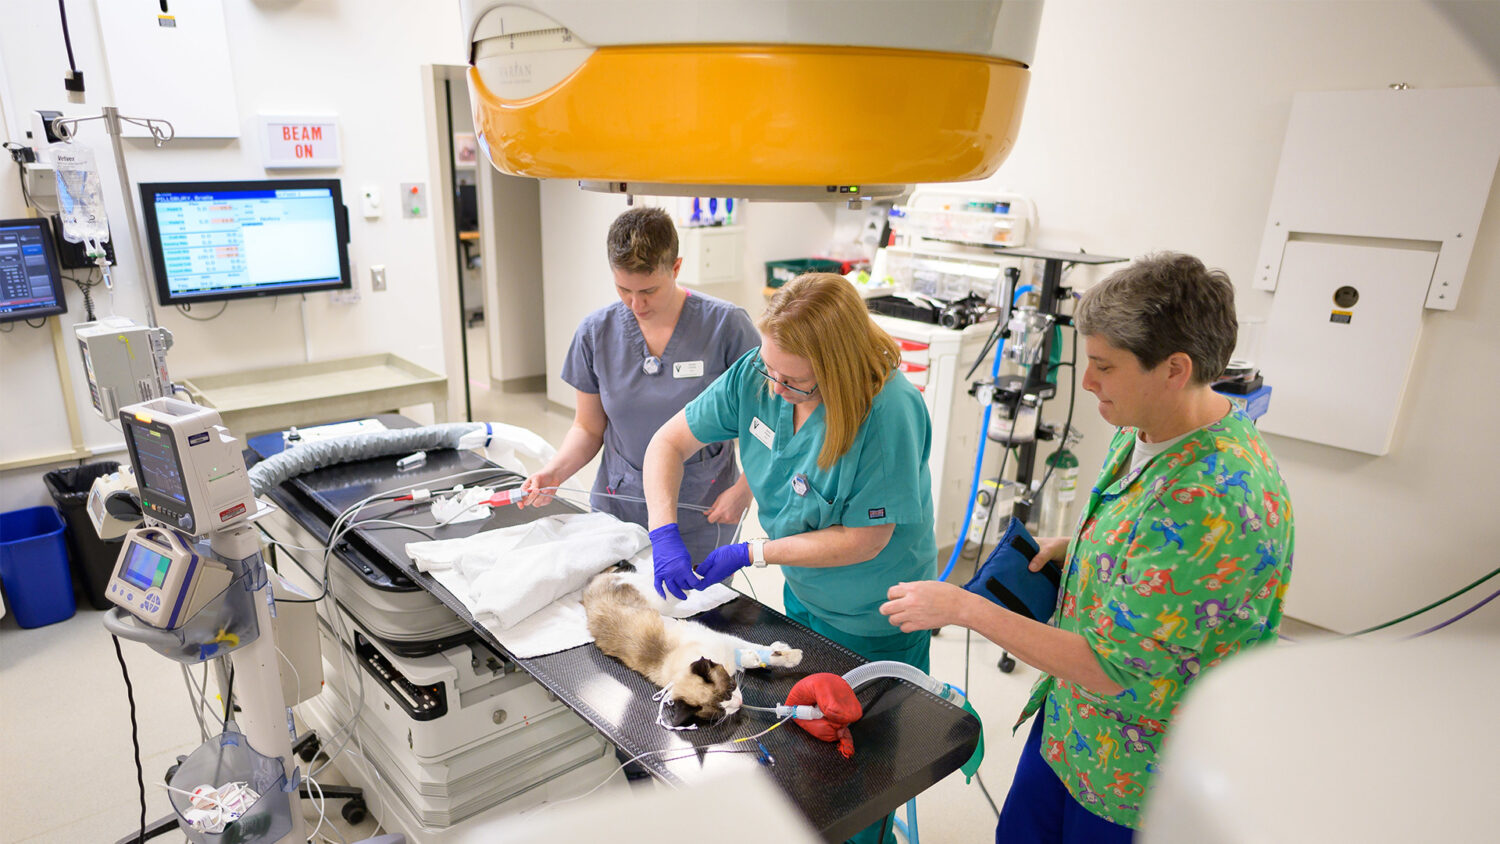 The medical team takes the best of care for their feline patient.